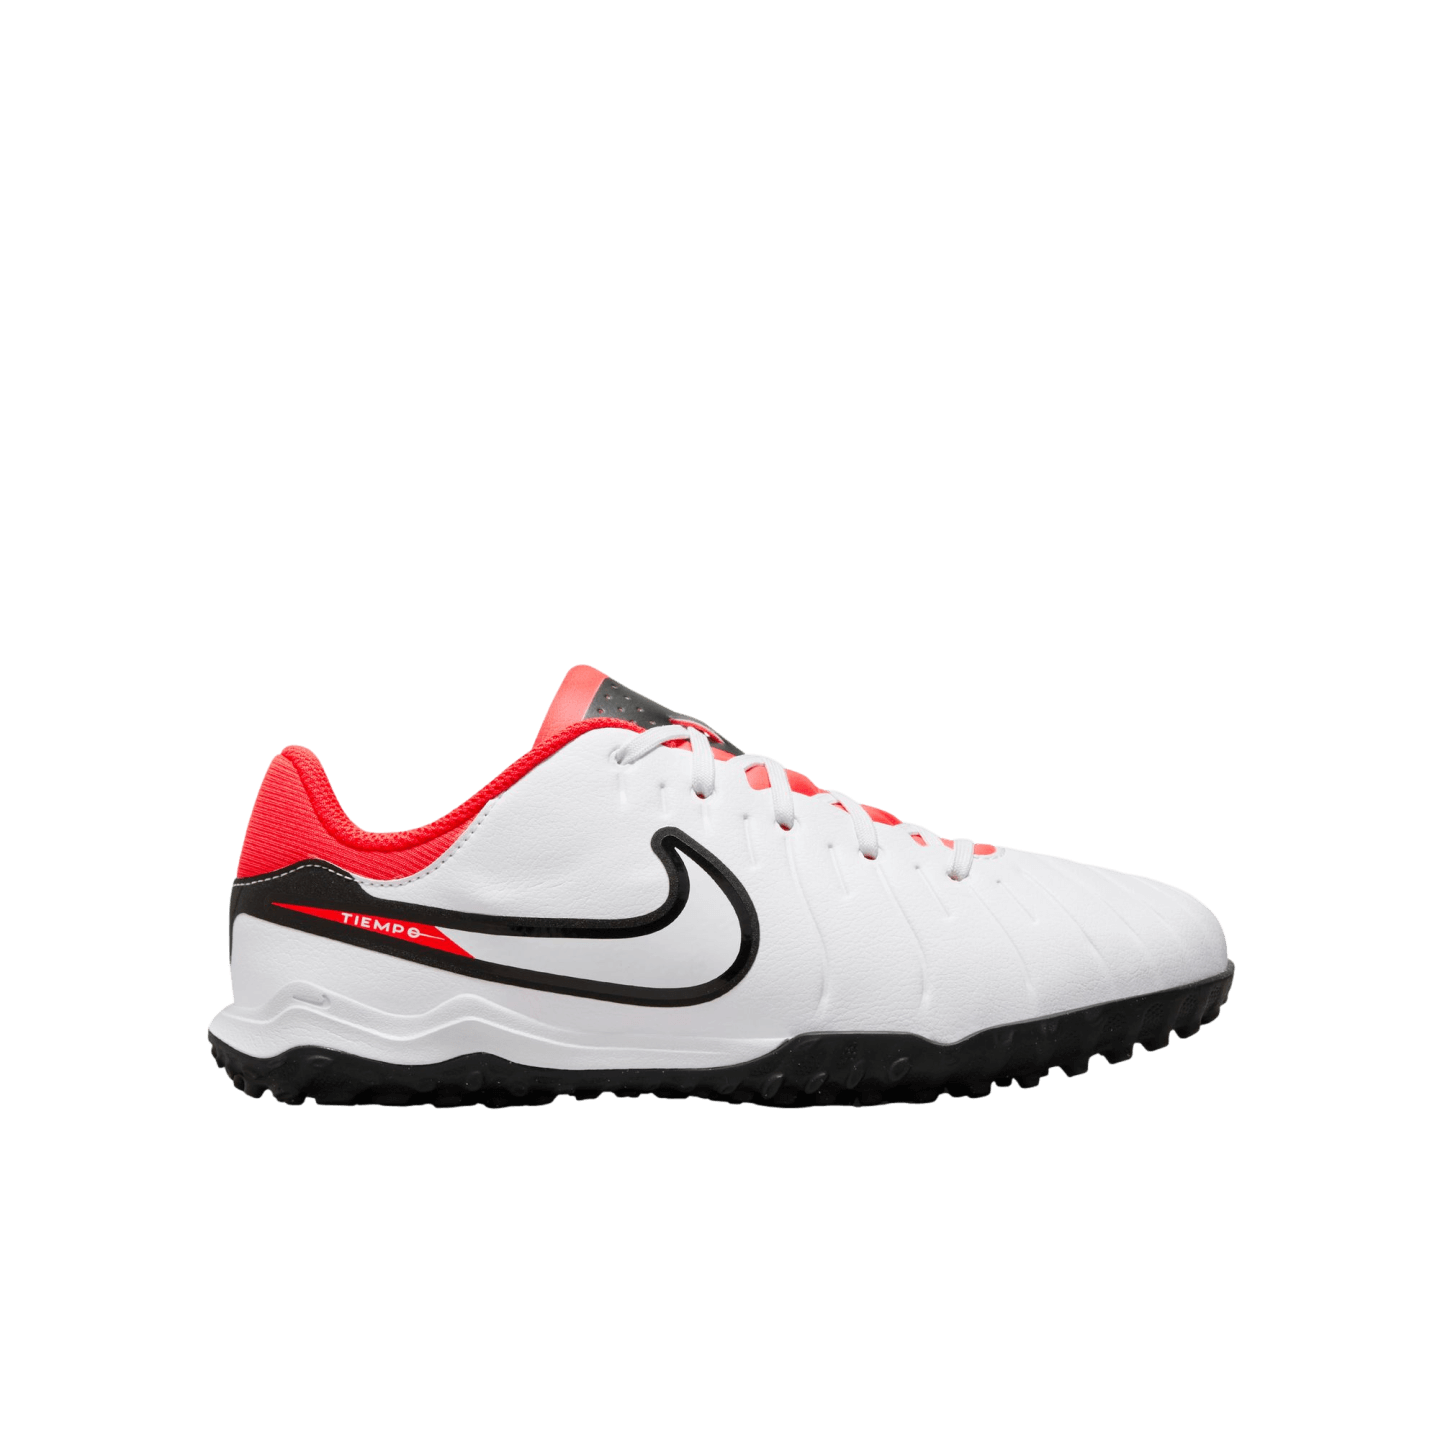 Nike Tiempo Legend 10 Academy Youth Turf Shoes